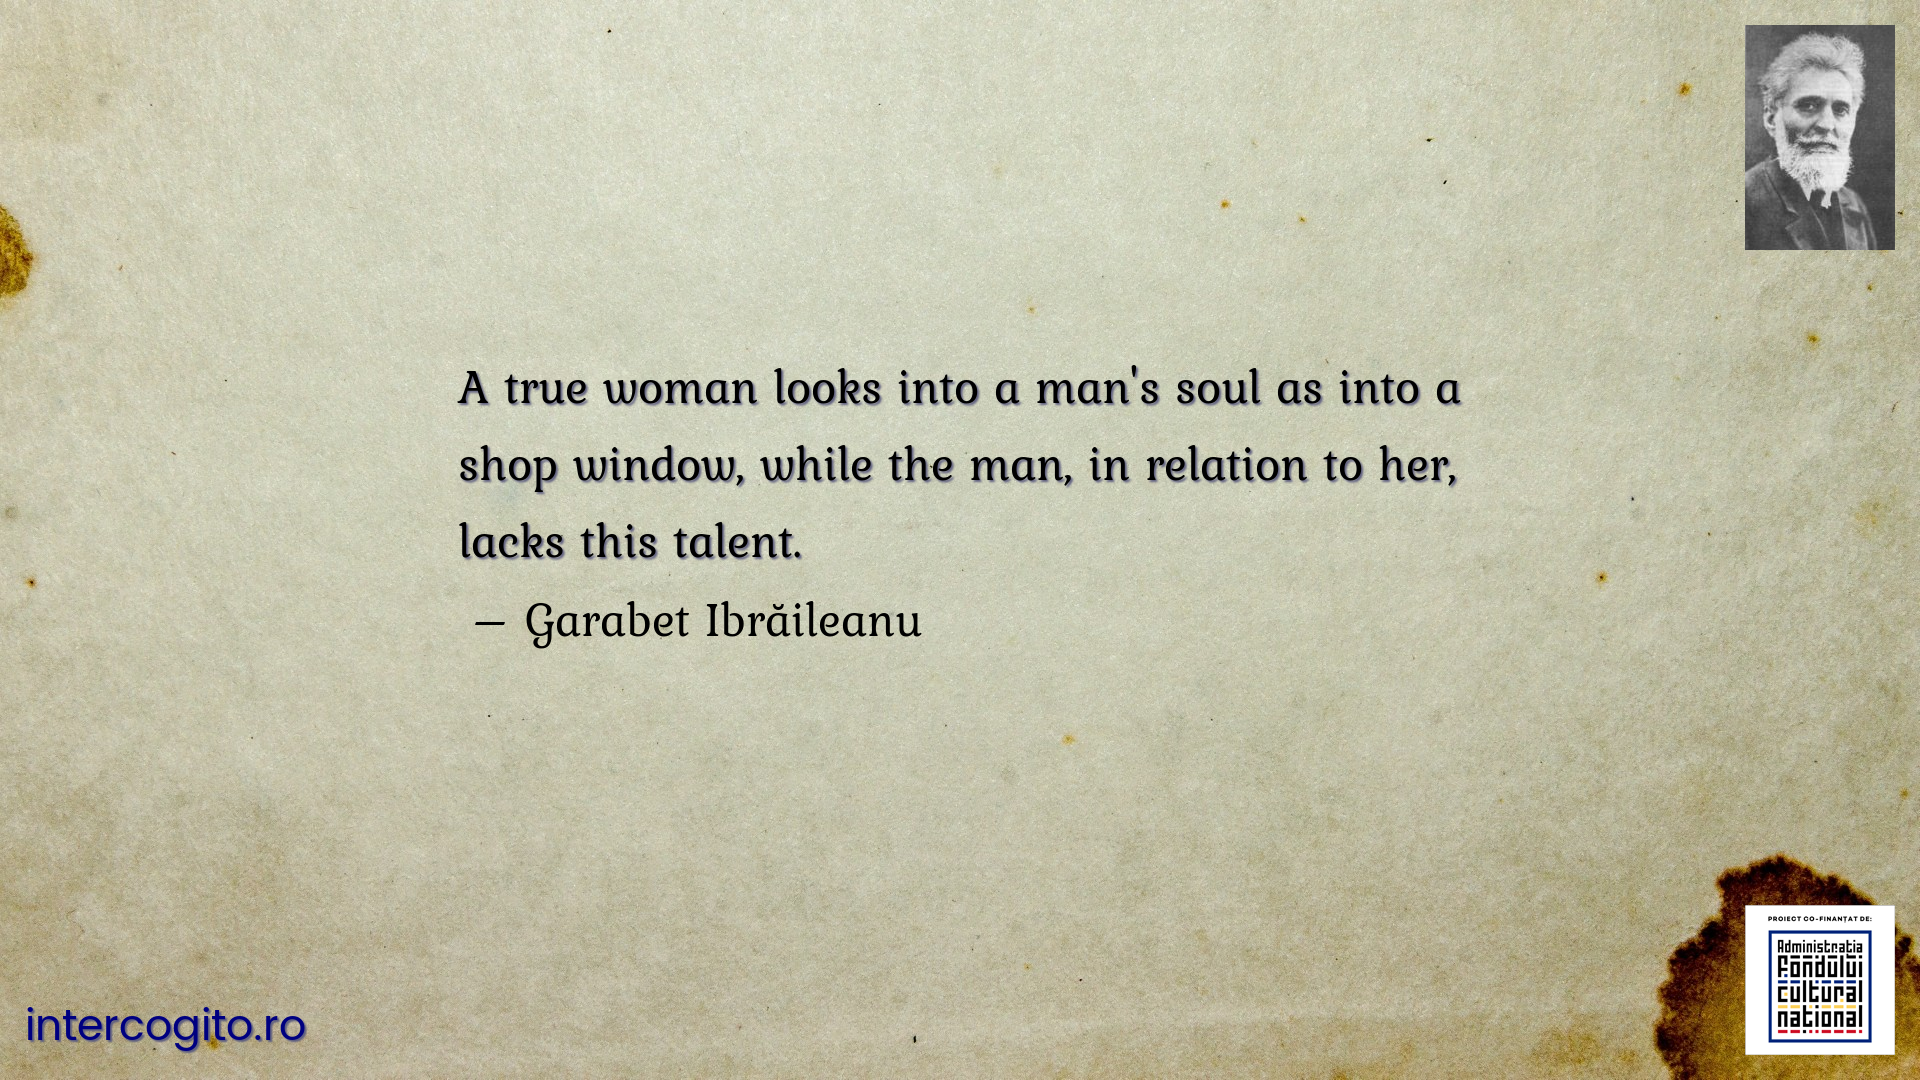 A true woman looks into a man's soul as into a shop window, while the man, in relation to her, lacks this talent.